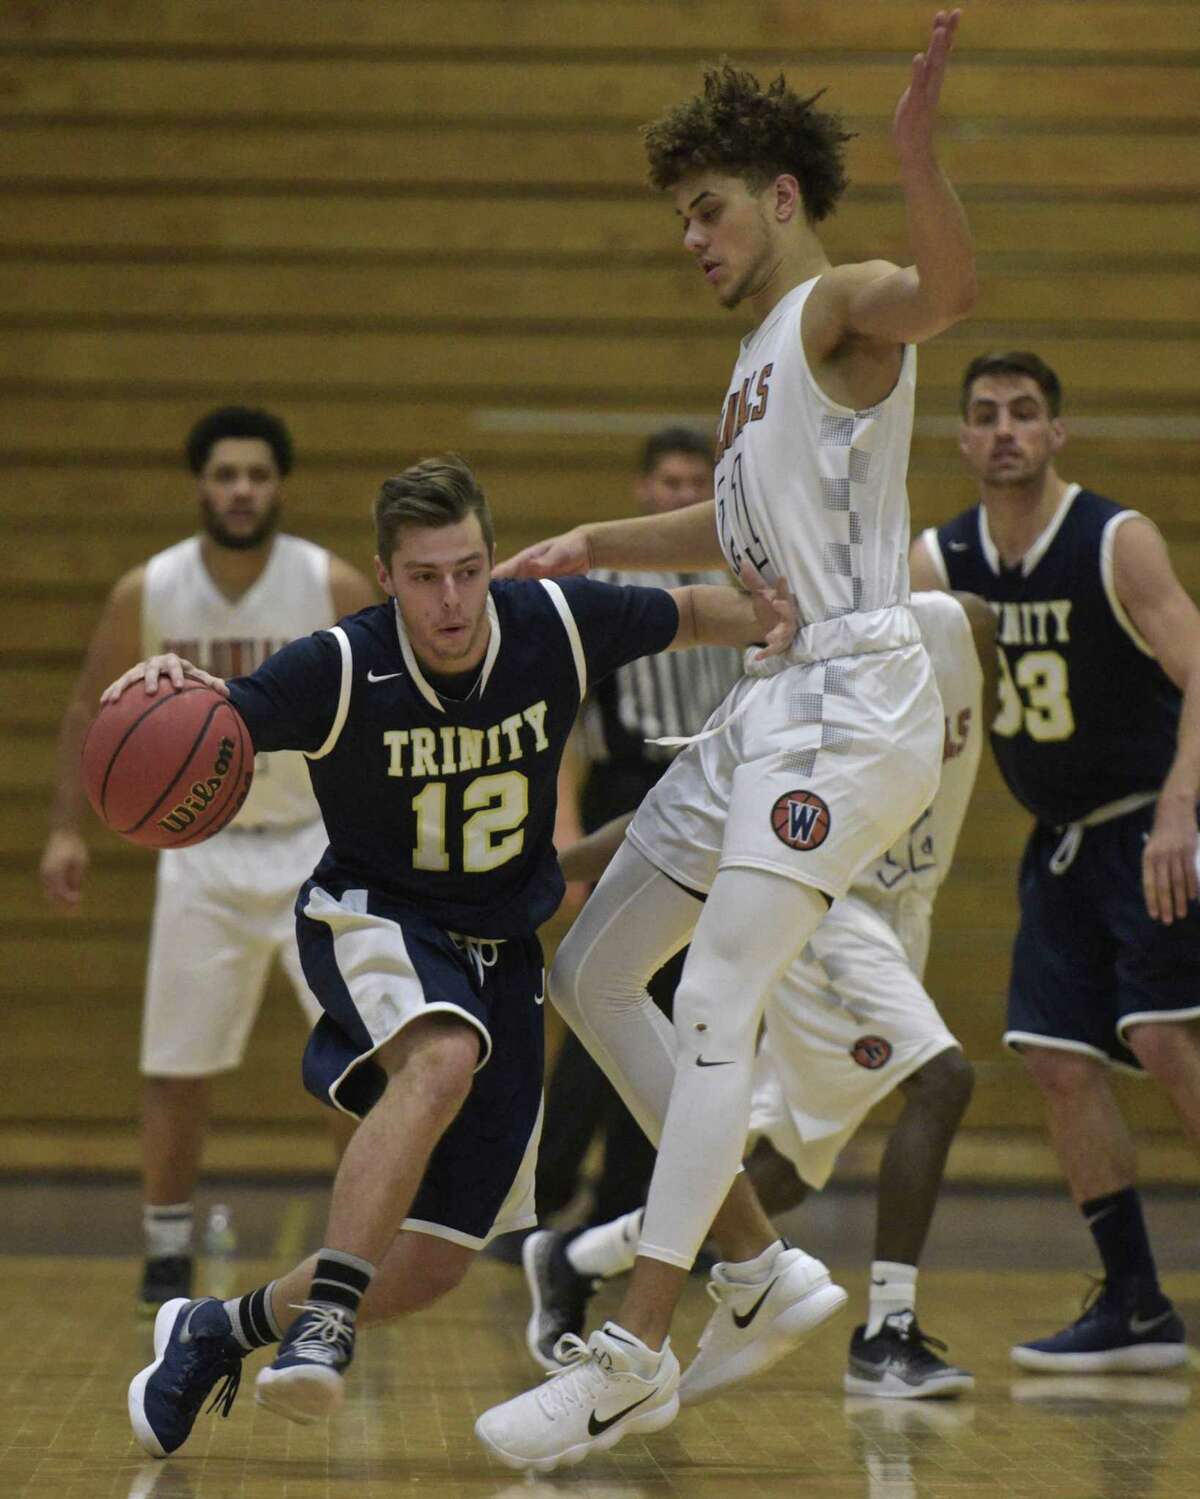 Trinity's Christian Porydzy (12) tries to go through Westconn's Fenton Bradley Jr (21) in the Men's basketball game between Trinity College and Western Connecticut State University on Thursday night, November 30, 2017, at the O'Neil Center-Feldman Arena, Westside Campus of WCSU, in Danbury, Conn.